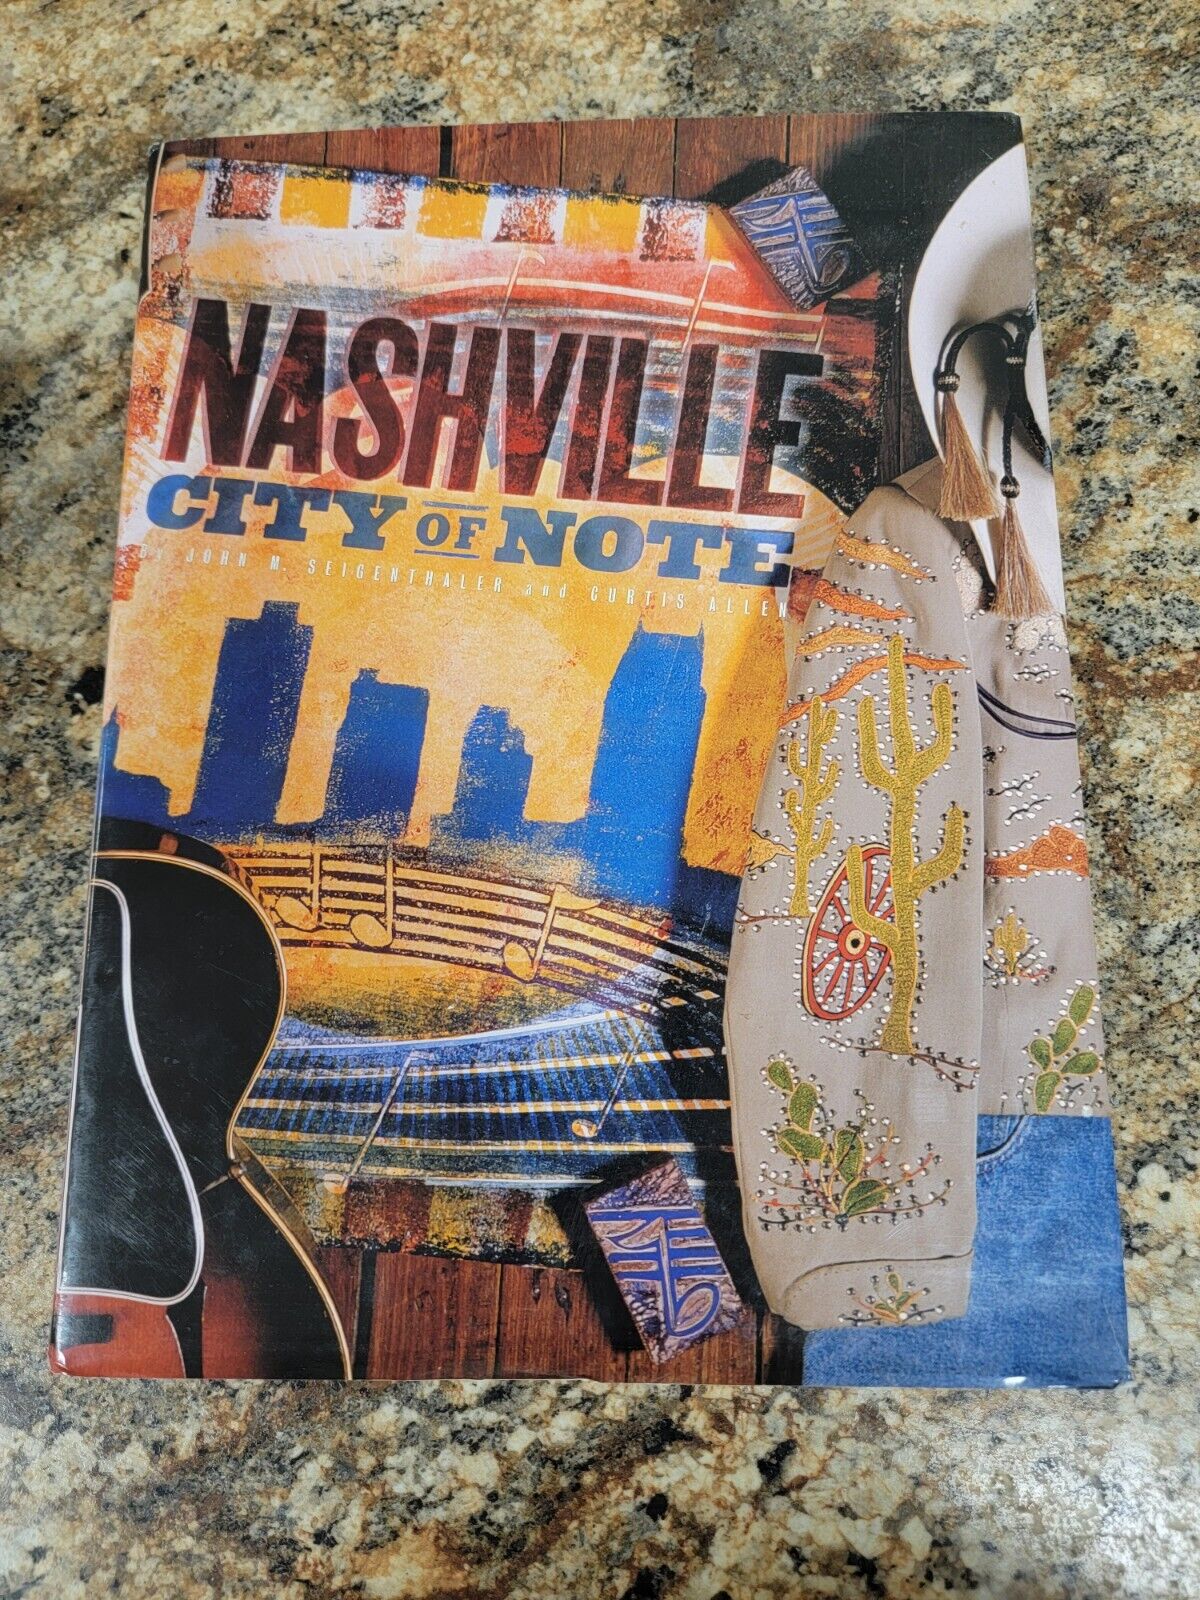 Nashville City of Note Coffee Table Amazing Reading Material